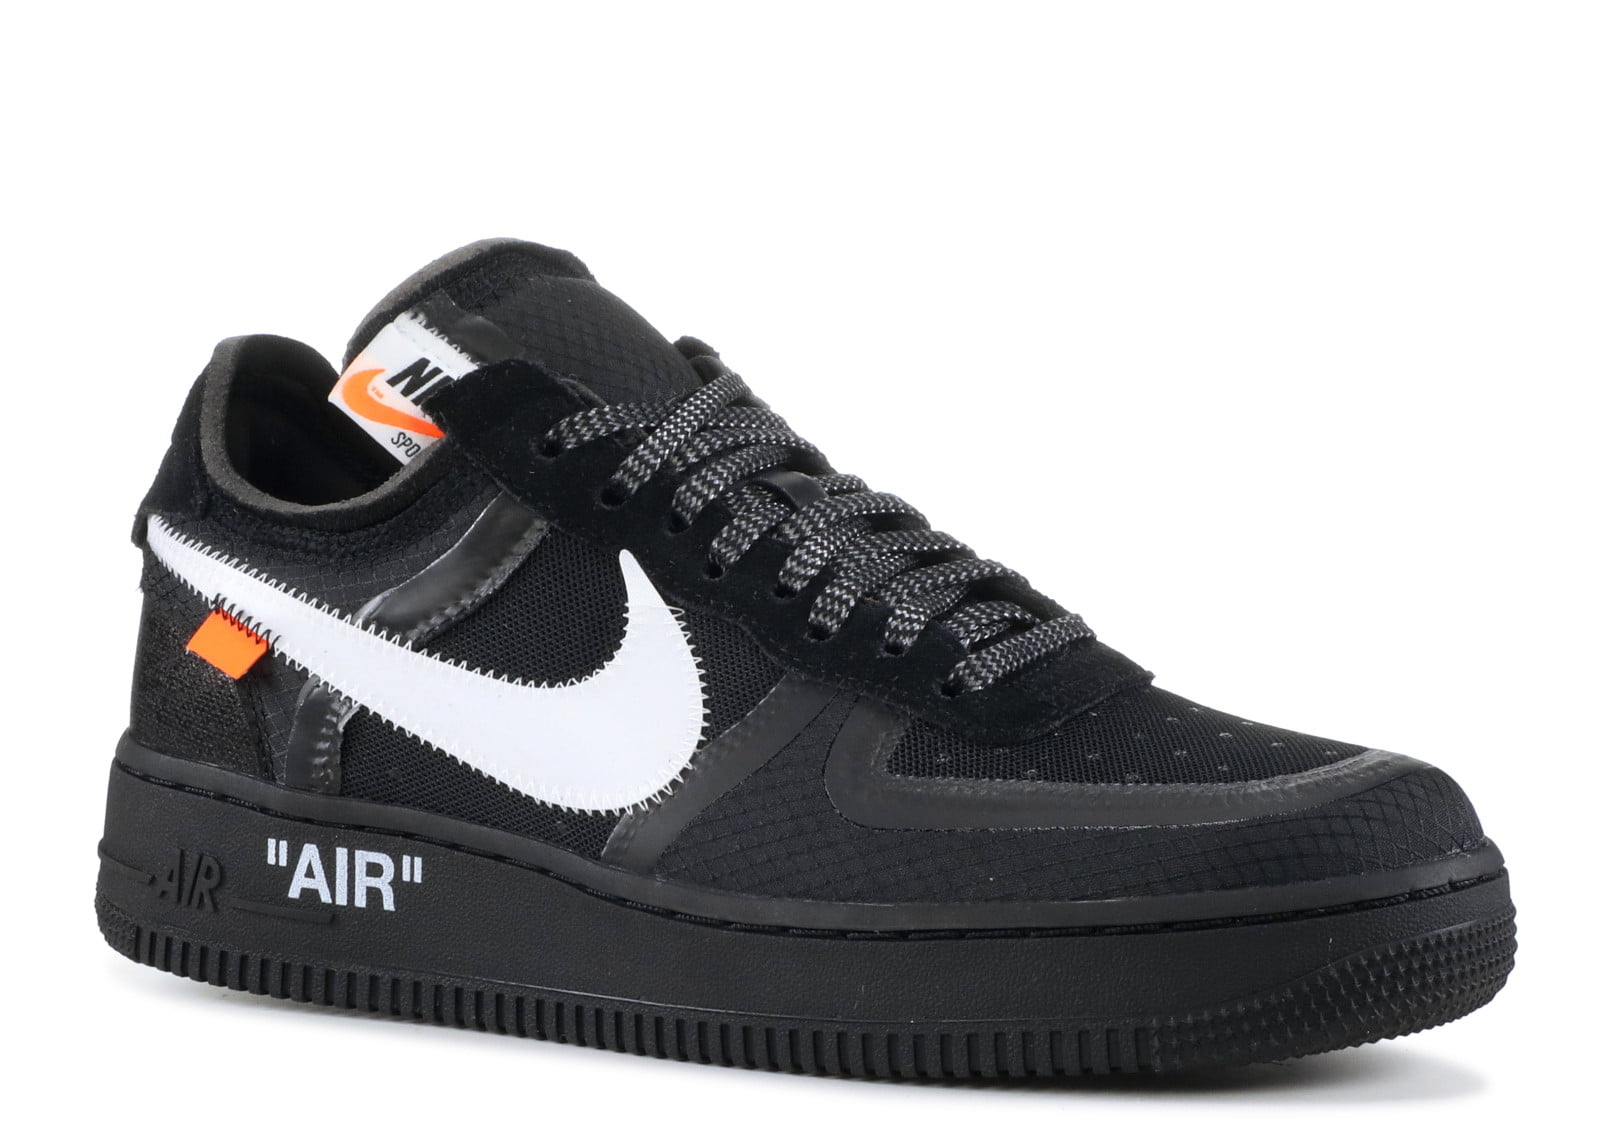 Walmart Knock Off Air Force Ones - Airforce Military